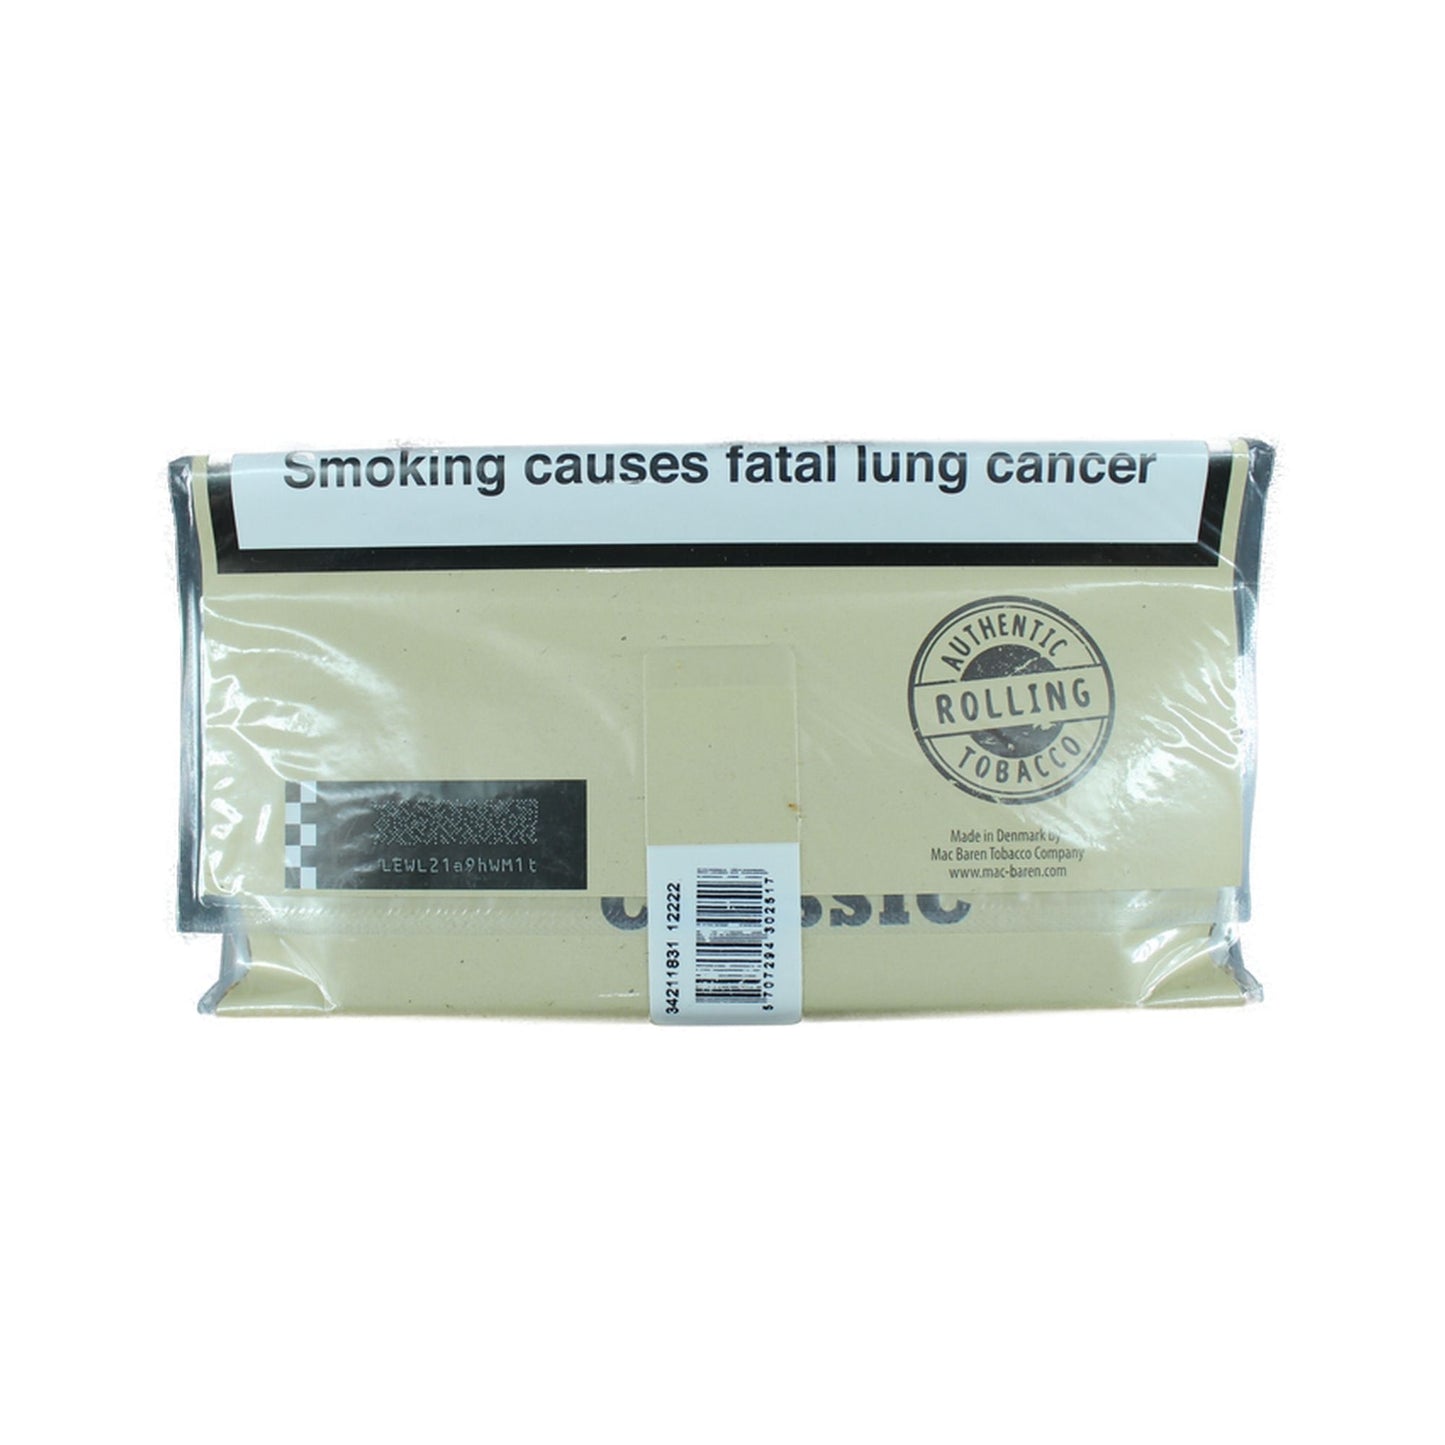 Buy R&W Classic Premium Blend Rolling Tobacco online in India